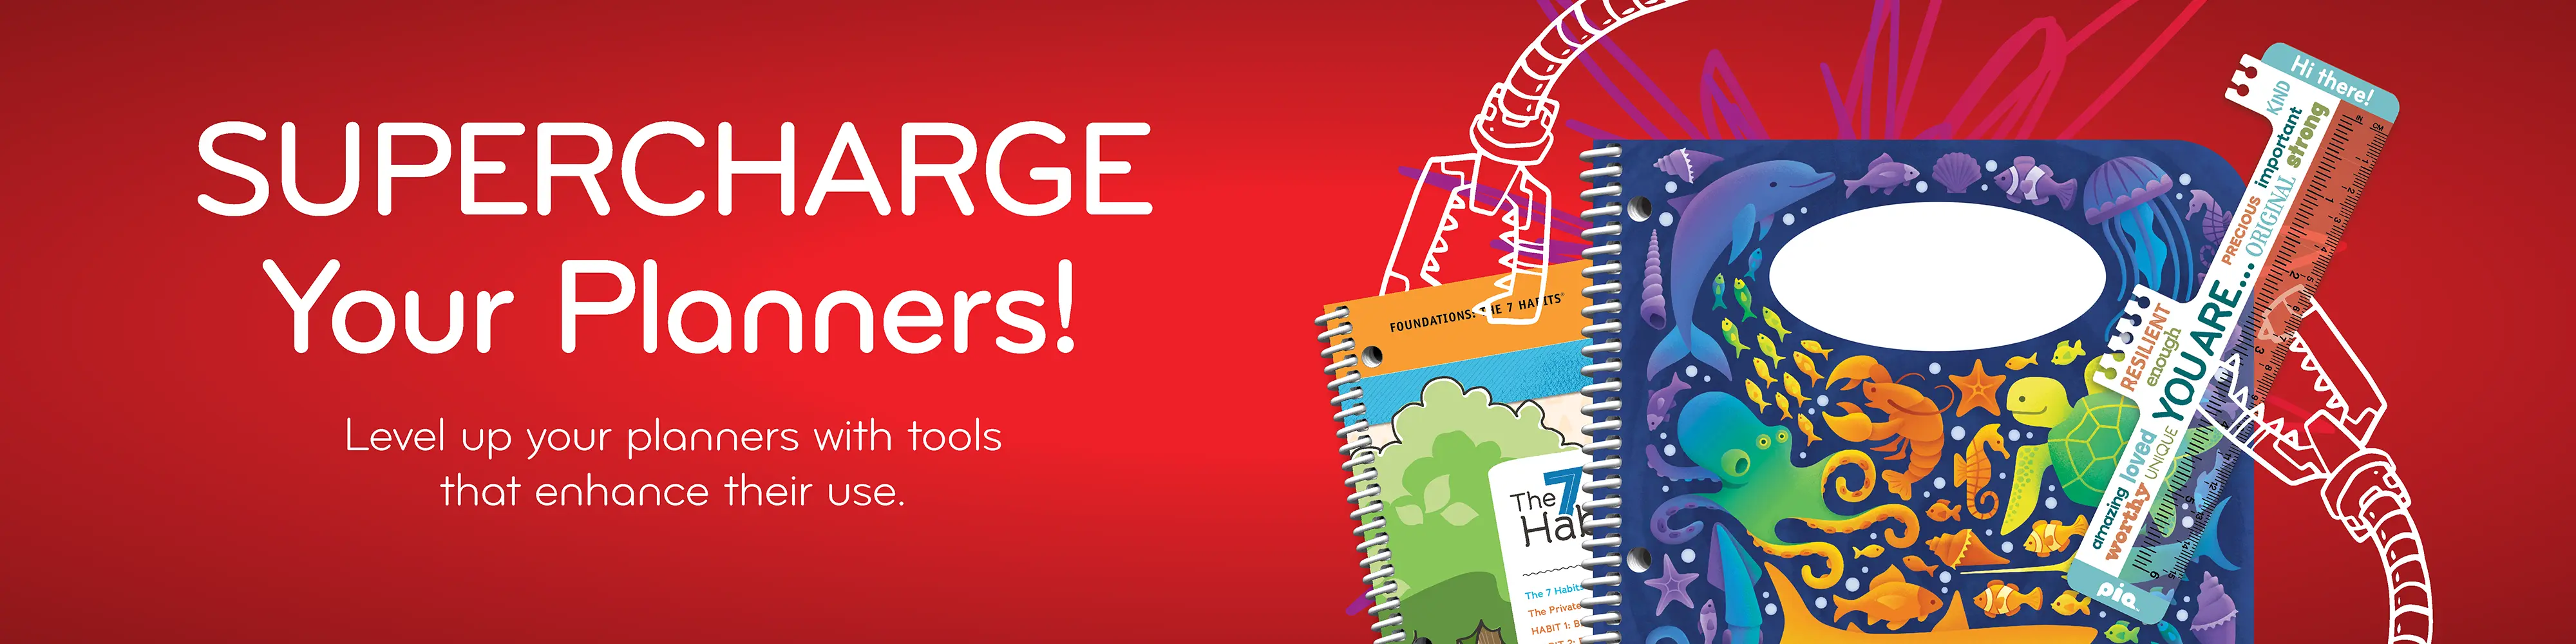 SUPERCHARGE Your Planners! Level up your planners with tools that enhance their use.